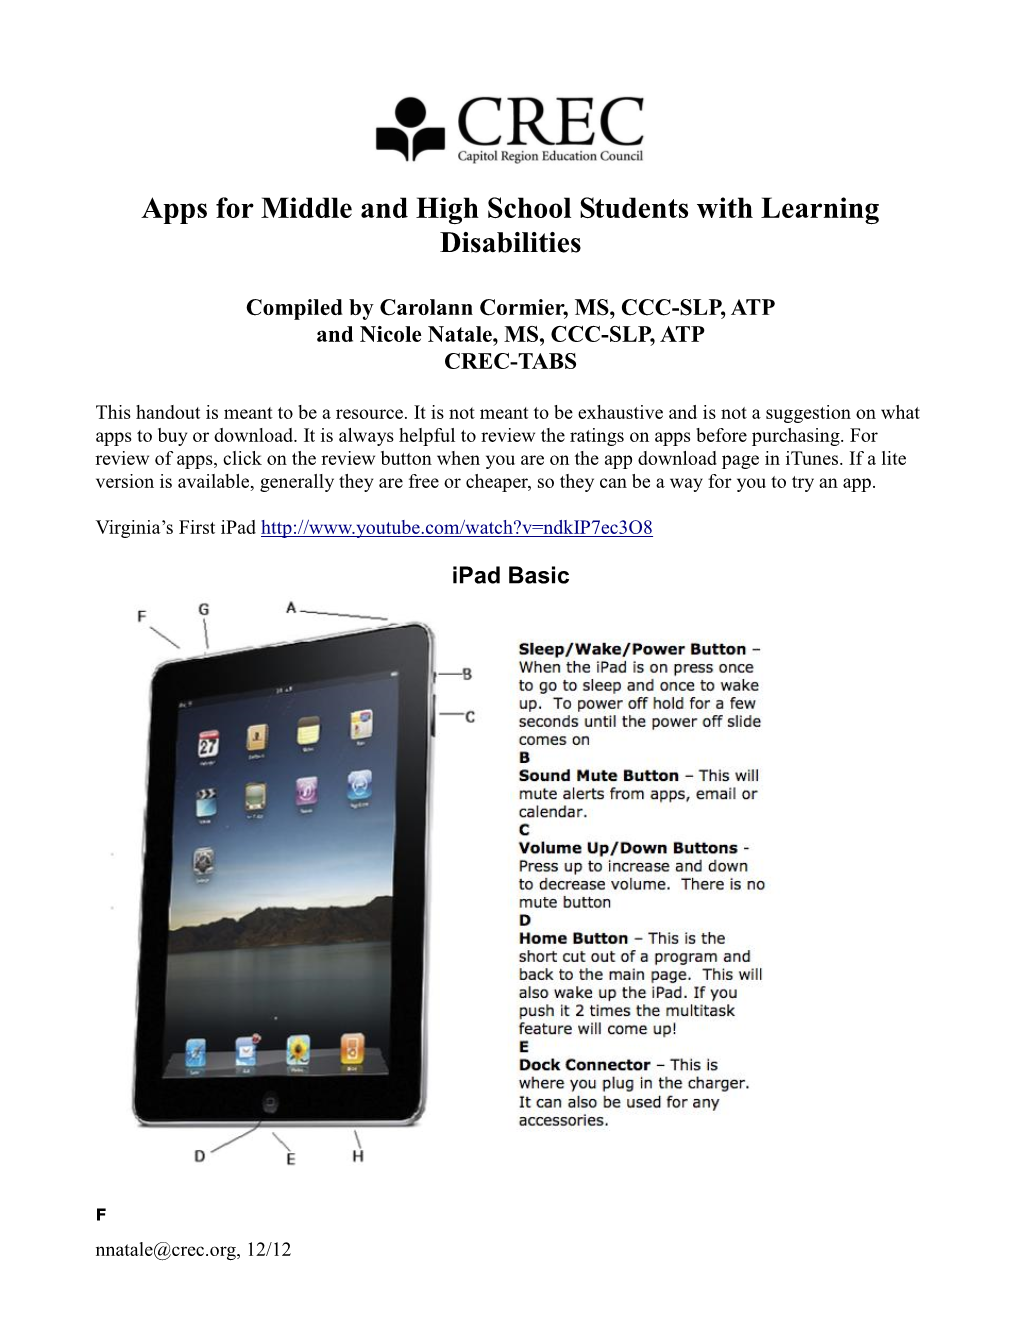 Apps for Middle and High School Students with Learning Disabilities